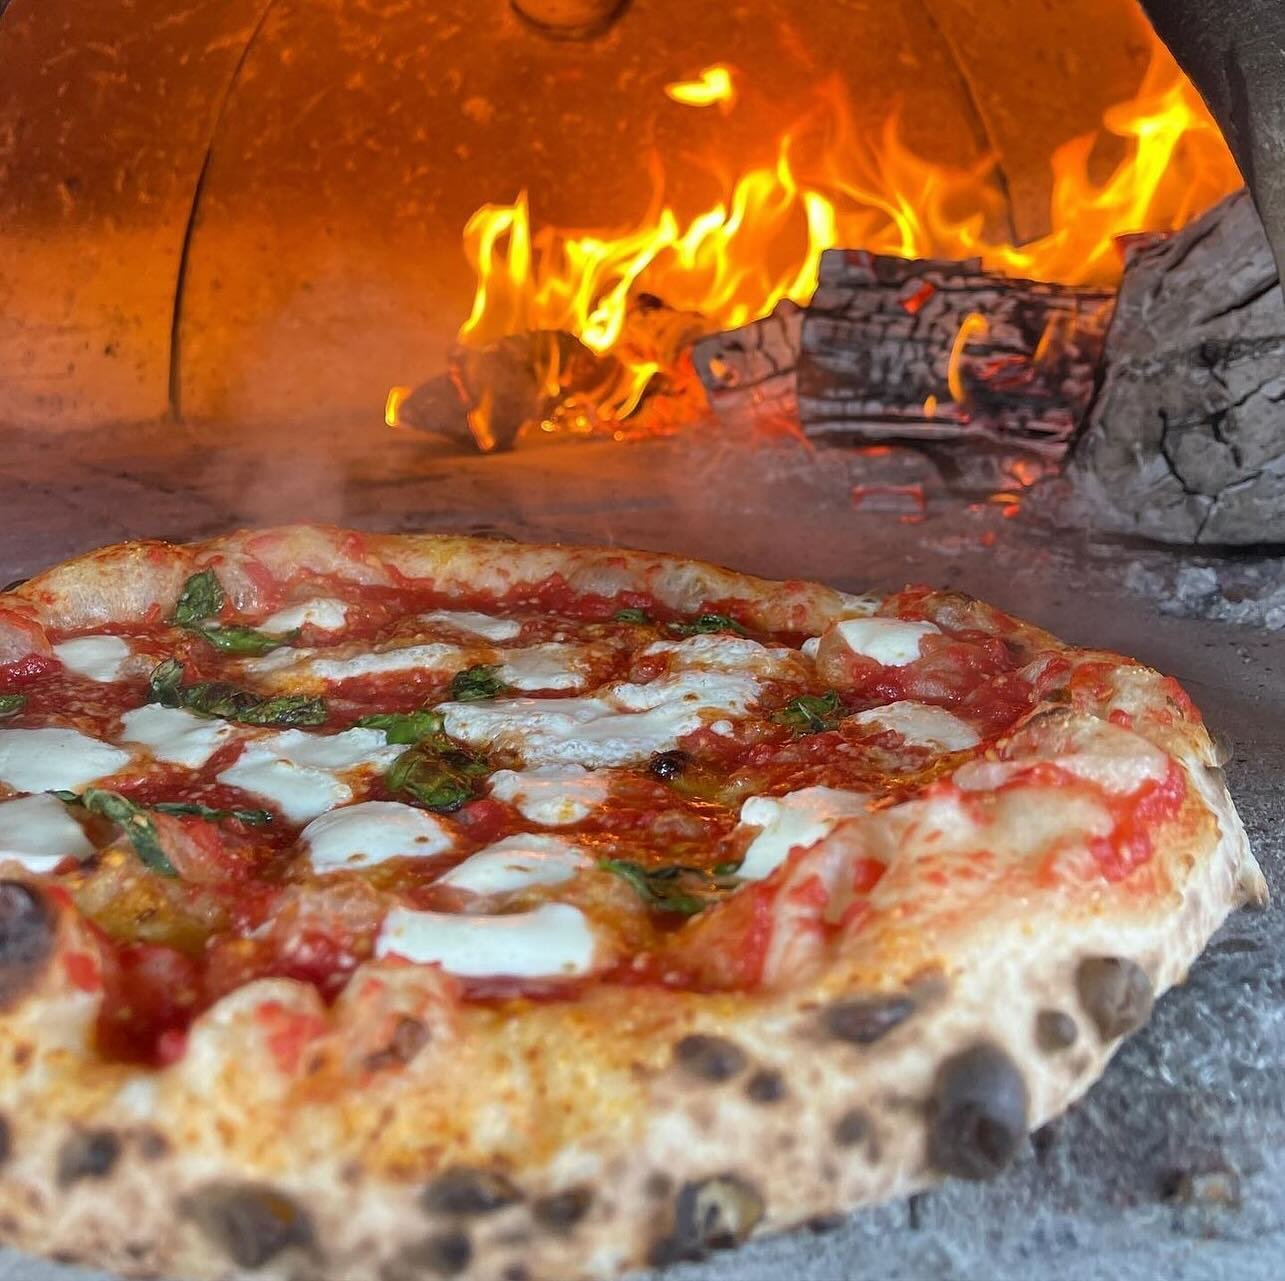 Don&rsquo;t miss our first-ever Night Bazaar that will run monthly under the Fremont Bride! The wood-fired pizza gang at @galileospizzeria is coming from Tacoma for one night only to our new Fremont Bridge Night Bazaar this Saturday, April 27th! Come